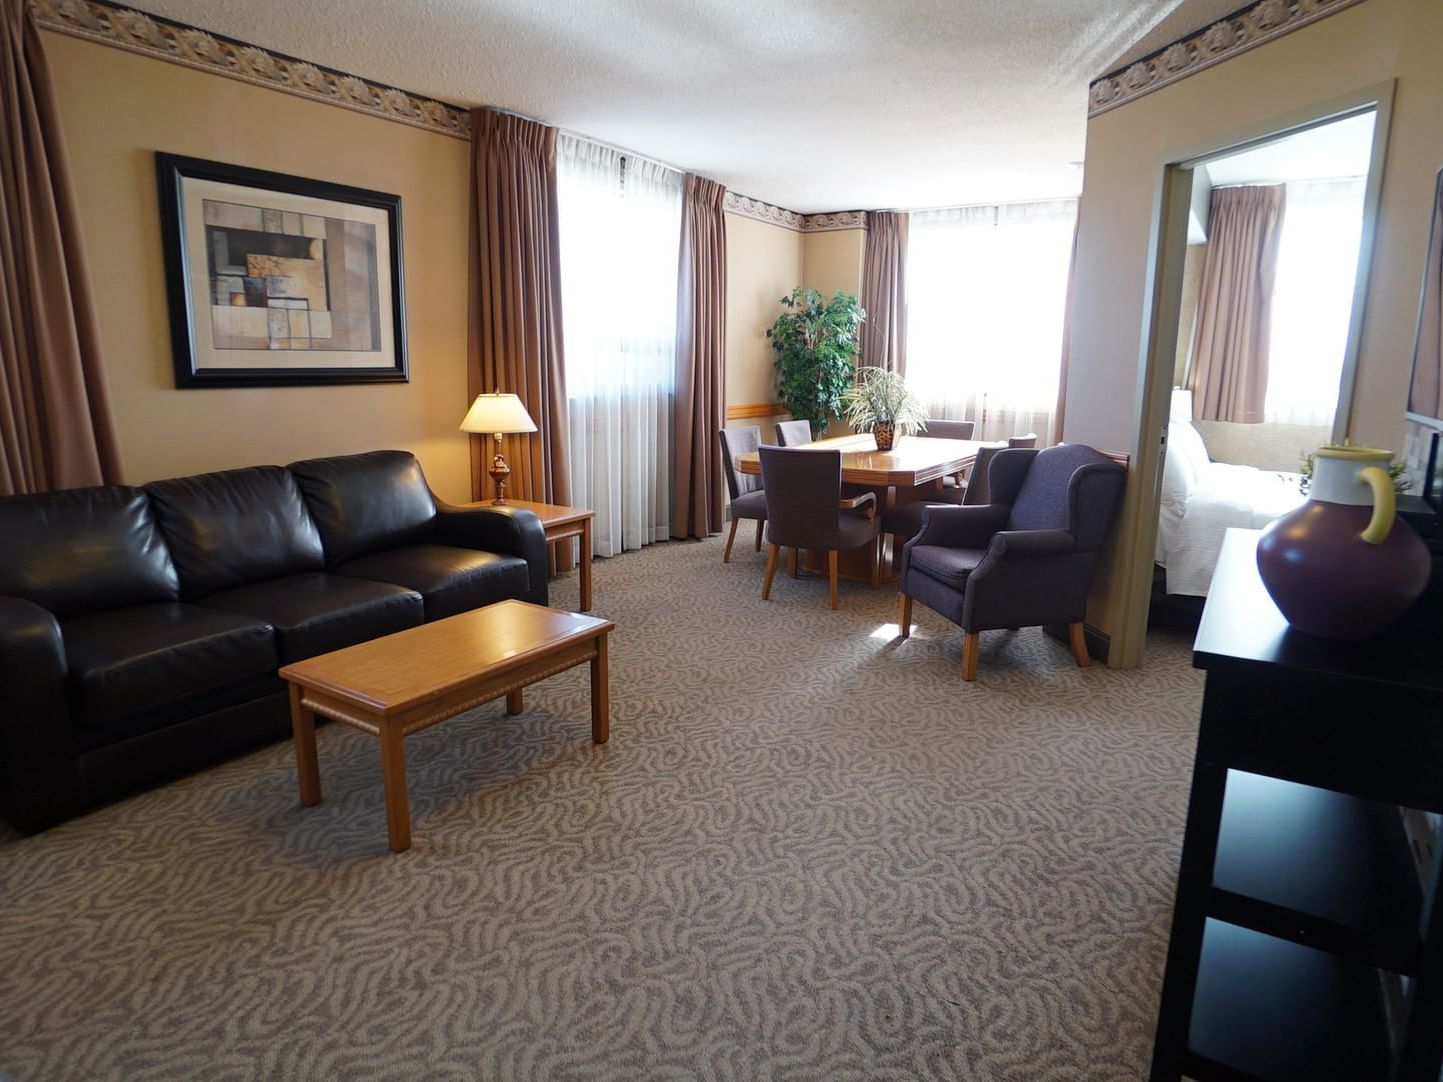 Living & dining areas with carpeted floors in Executive Suite at The Glenmore Inn & Convention Centre